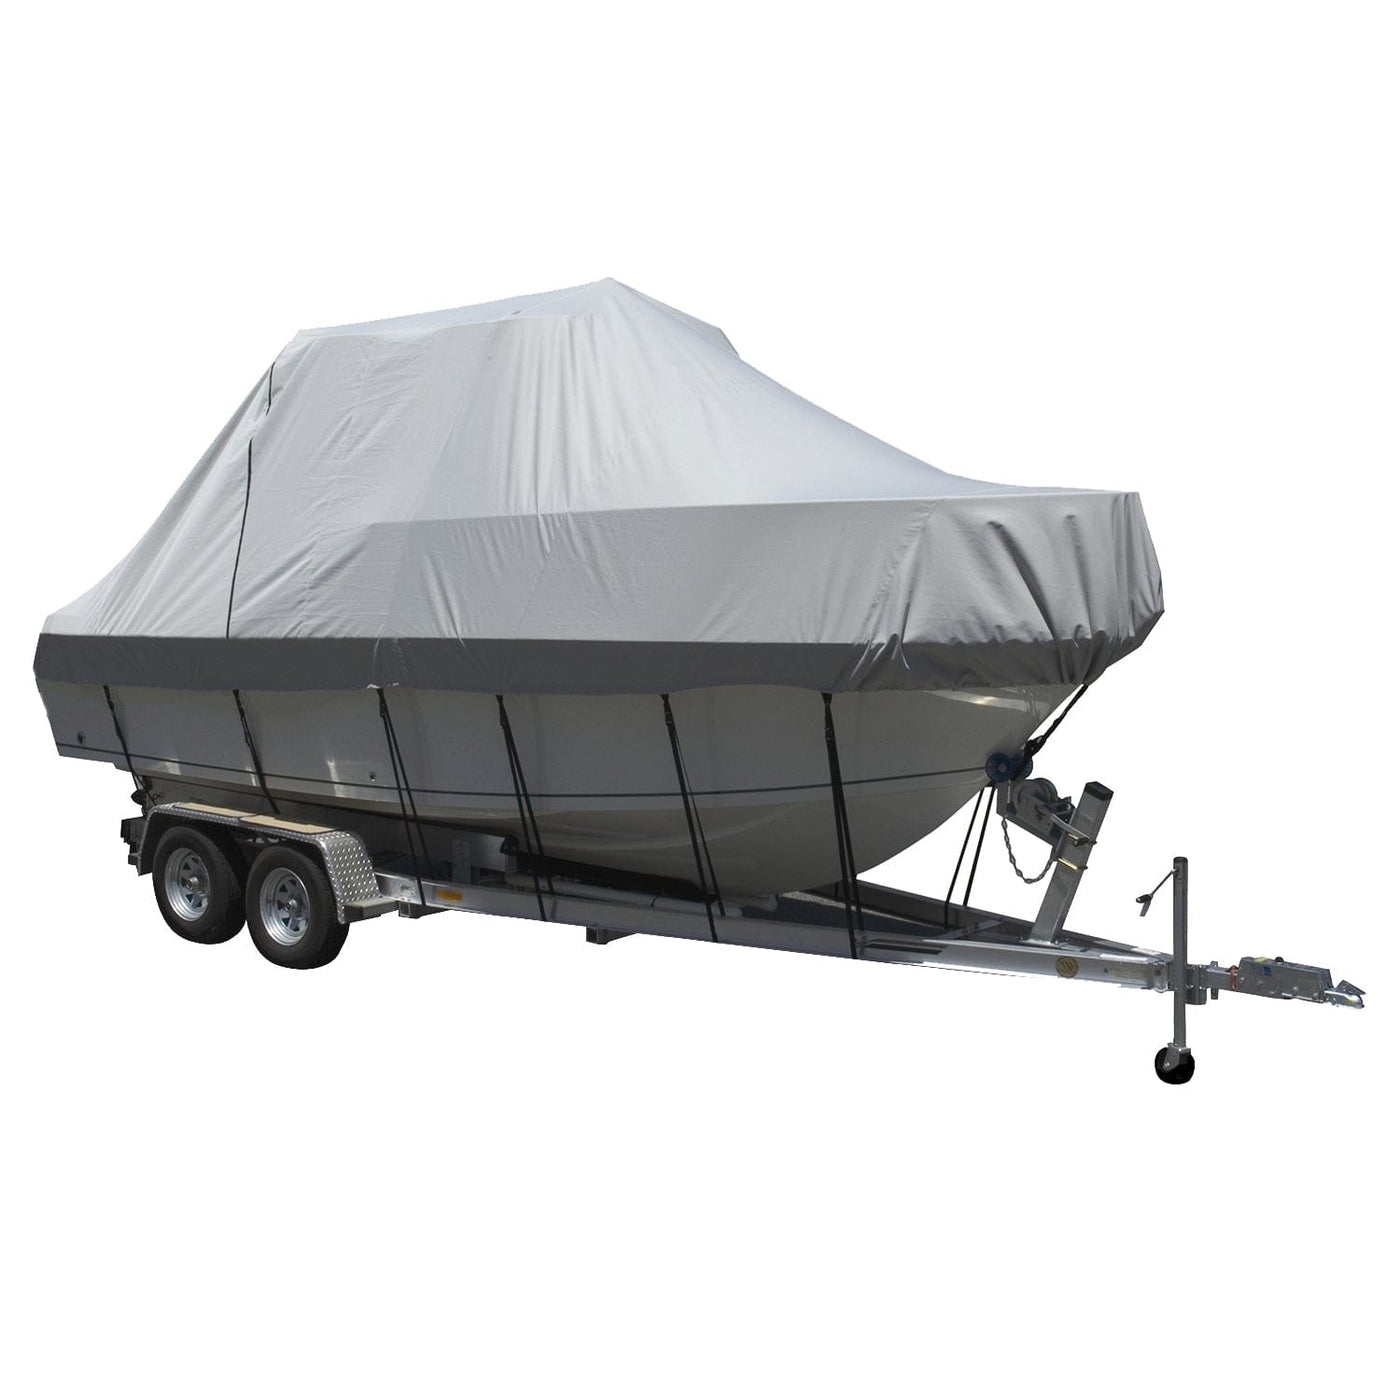 Carver by Covercraft Carver Performance Poly-Guard Specialty Boat Cover f/22.5' Walk Around Cuddy & Center Console Boats - Grey Winterizing